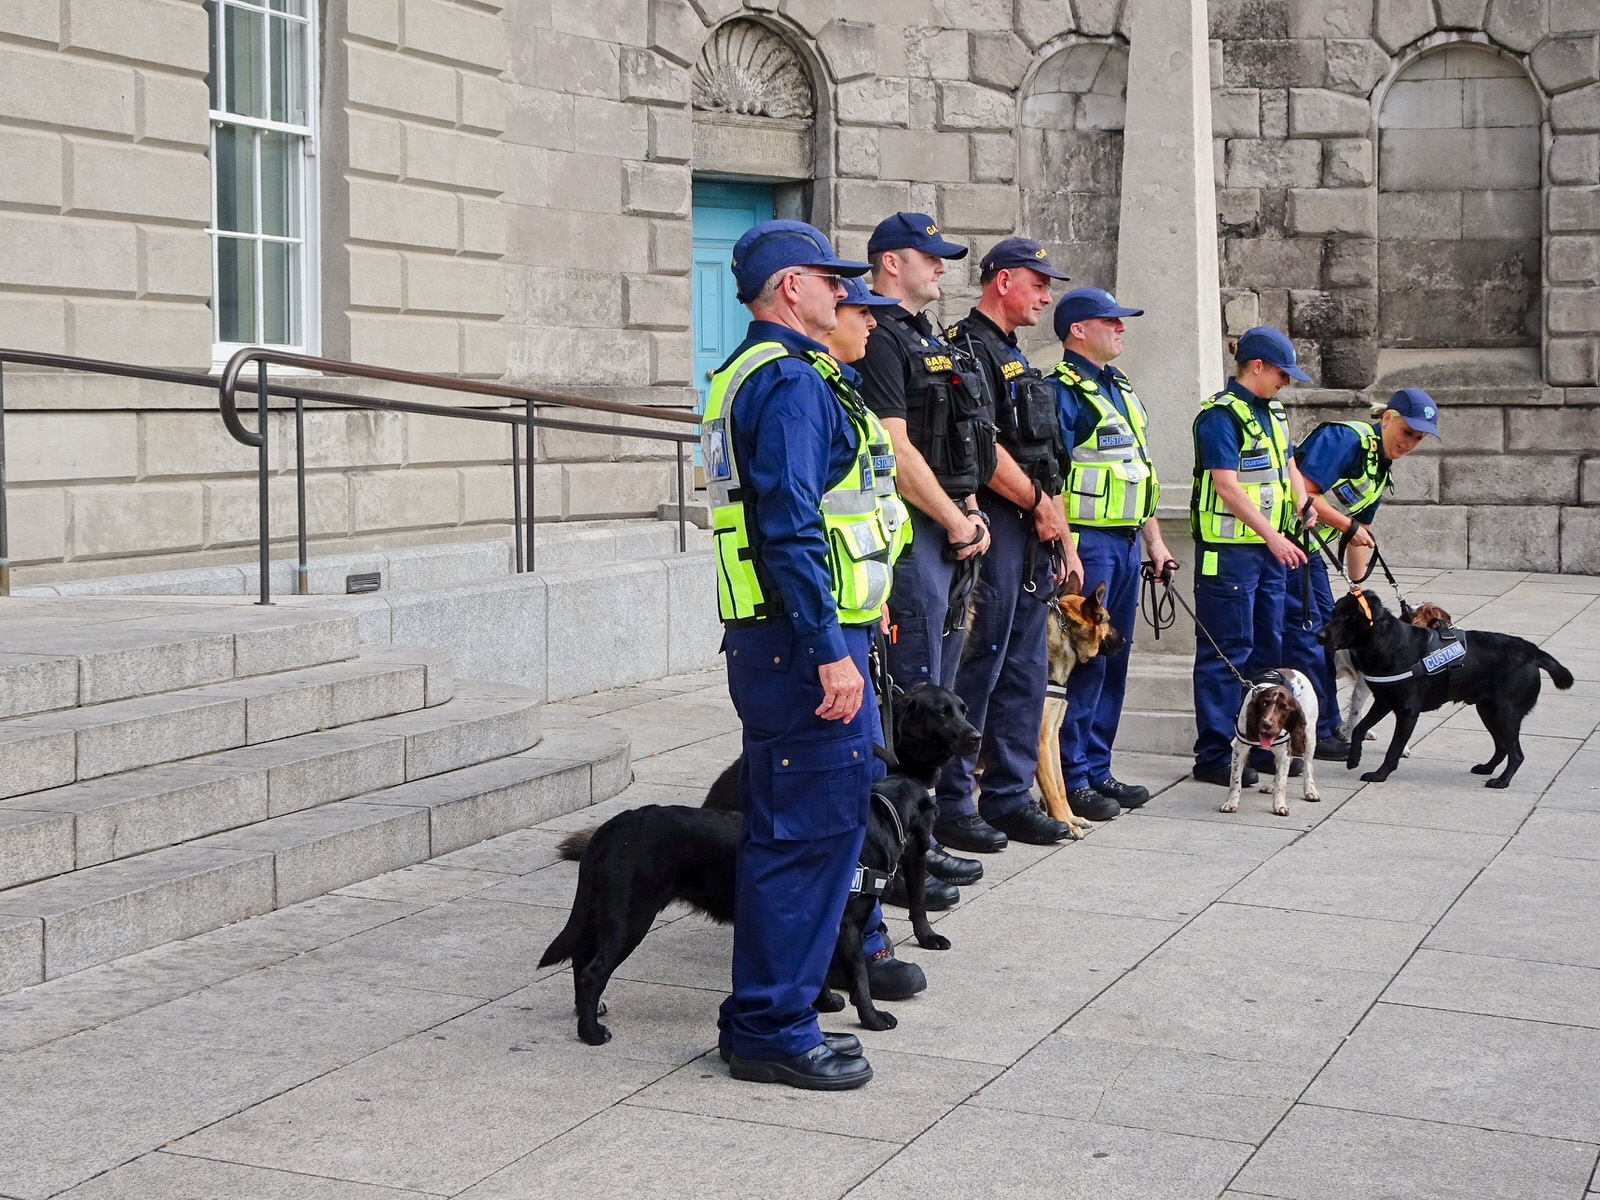 THE DOGS WHO WORK FOR THE IRISH CUSTOMS SERVICE [INVITED THE PRESS TO A PHOTO-SHOOT] 001
